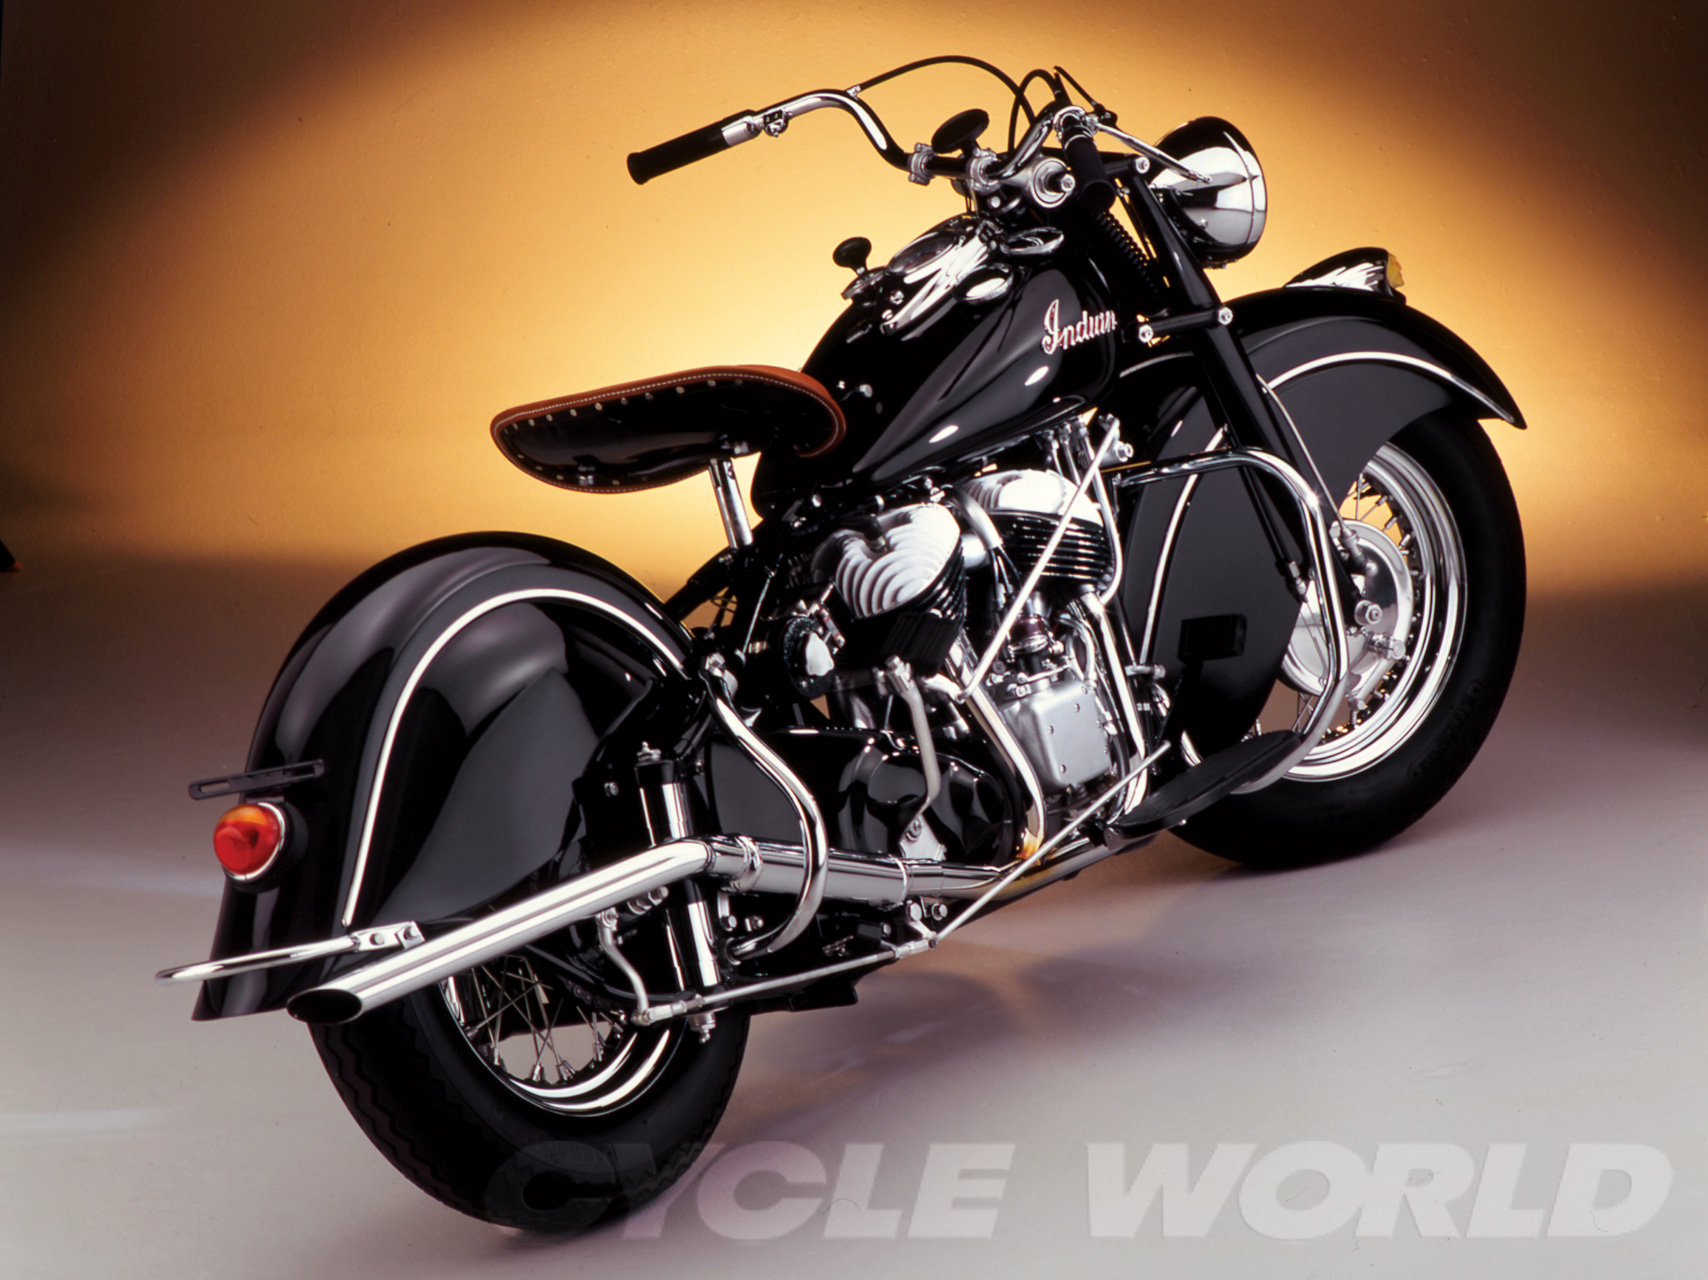 Indian Motorcycles- History of America's Oldest Motorcycle Brand